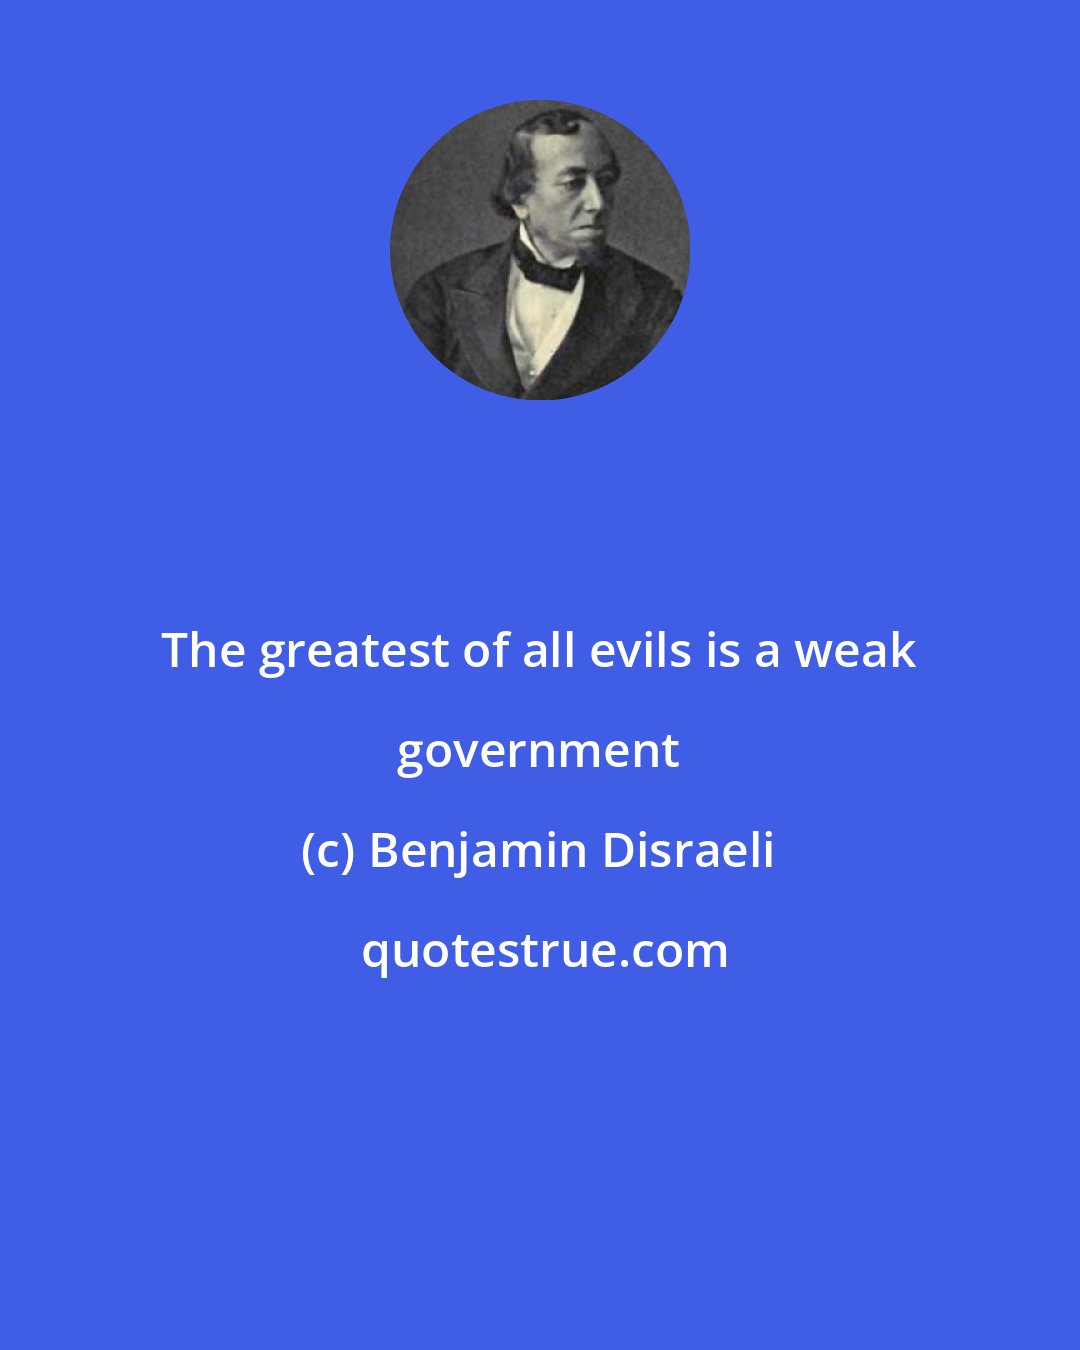 Benjamin Disraeli: The greatest of all evils is a weak government